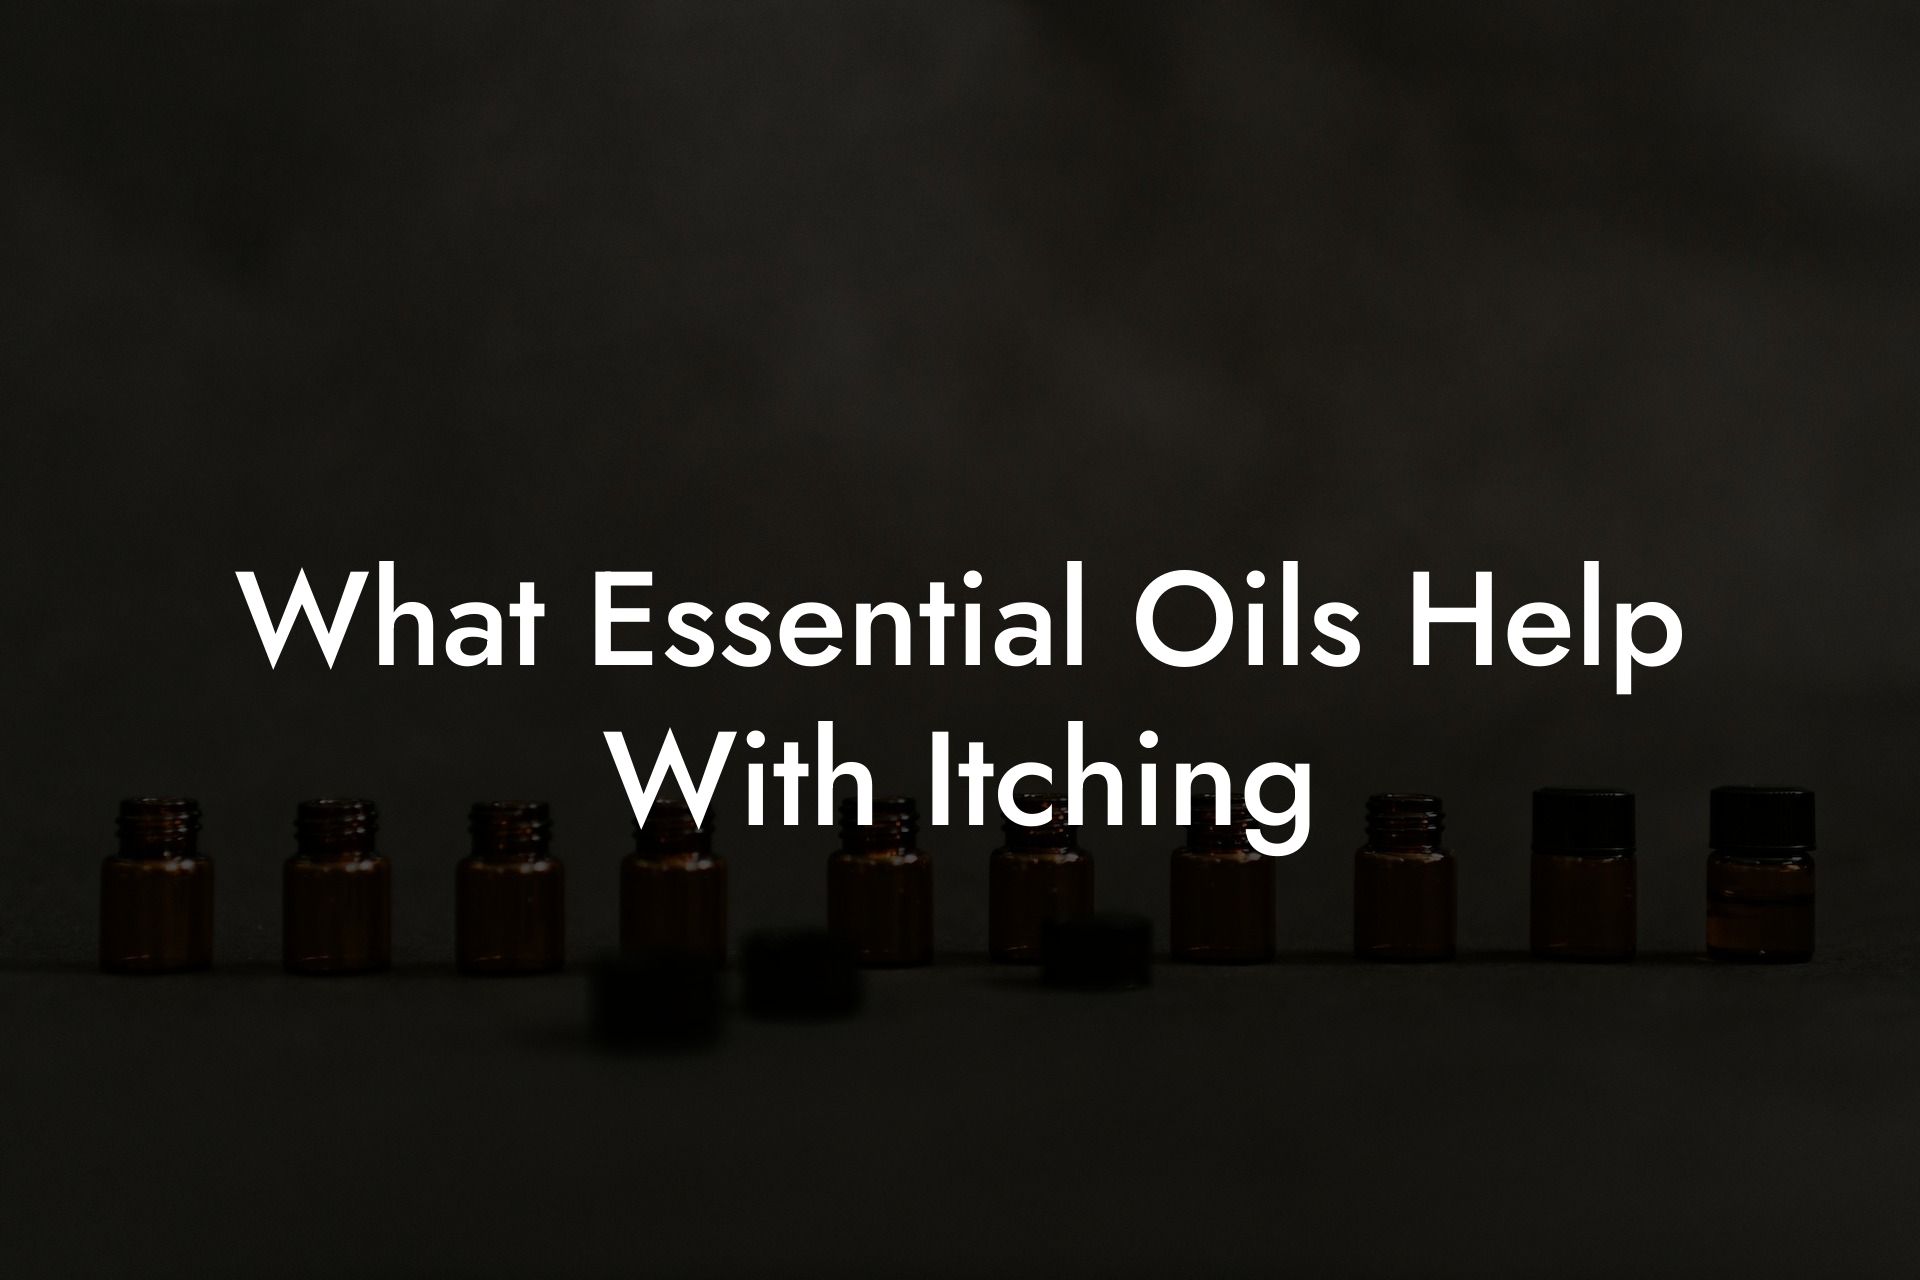 What Essential Oils Help With Itching